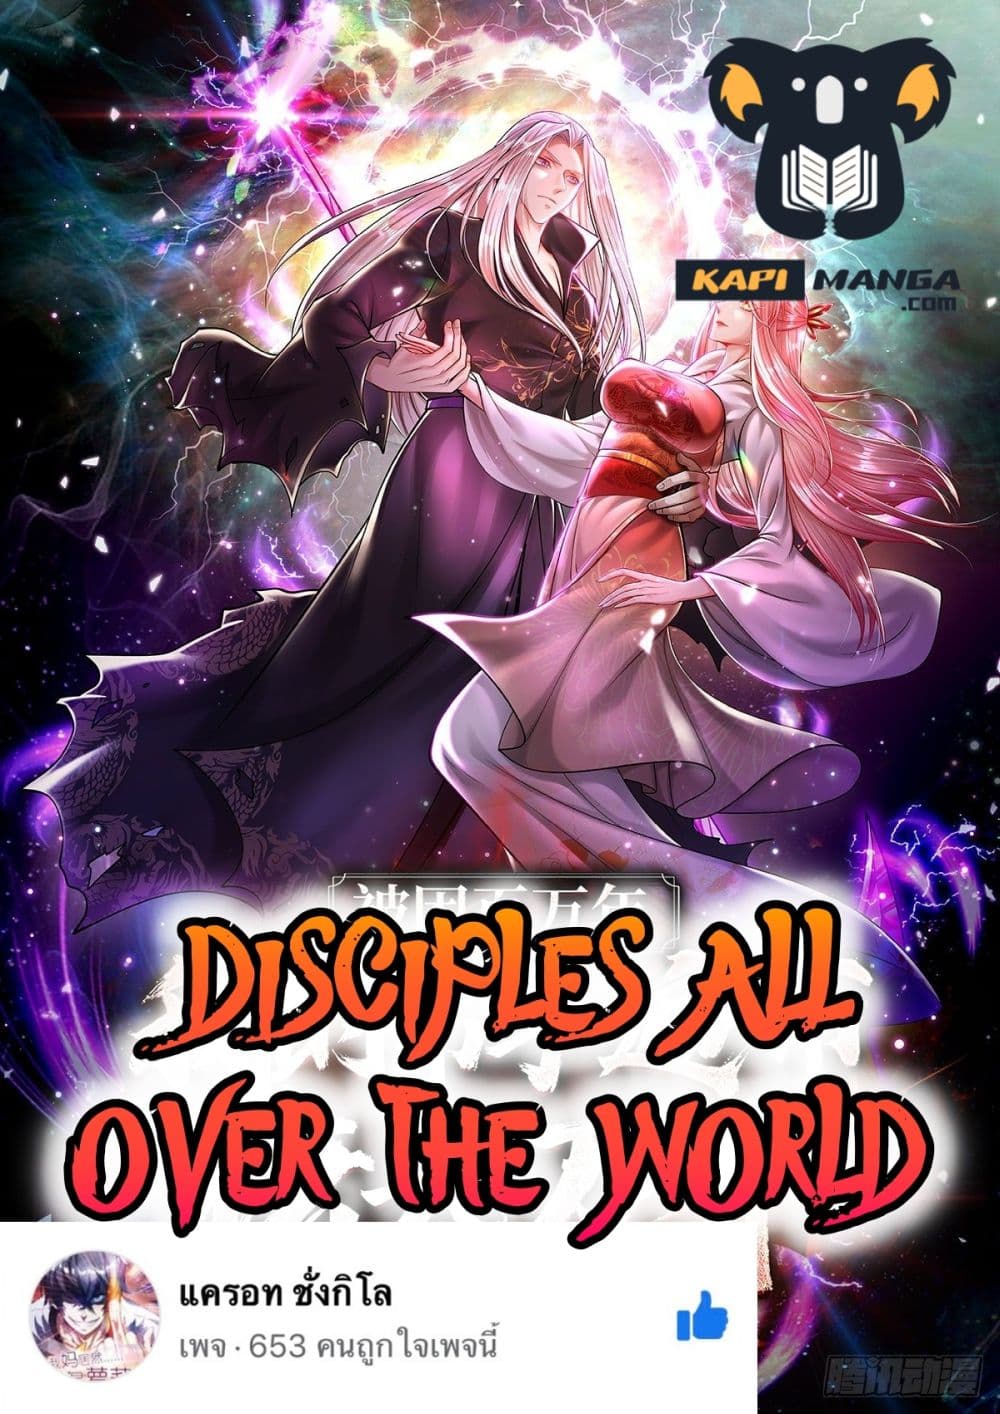 Disciples All Over the World à¸à¸­à¸à¸à¸µà¹ 67 (1)